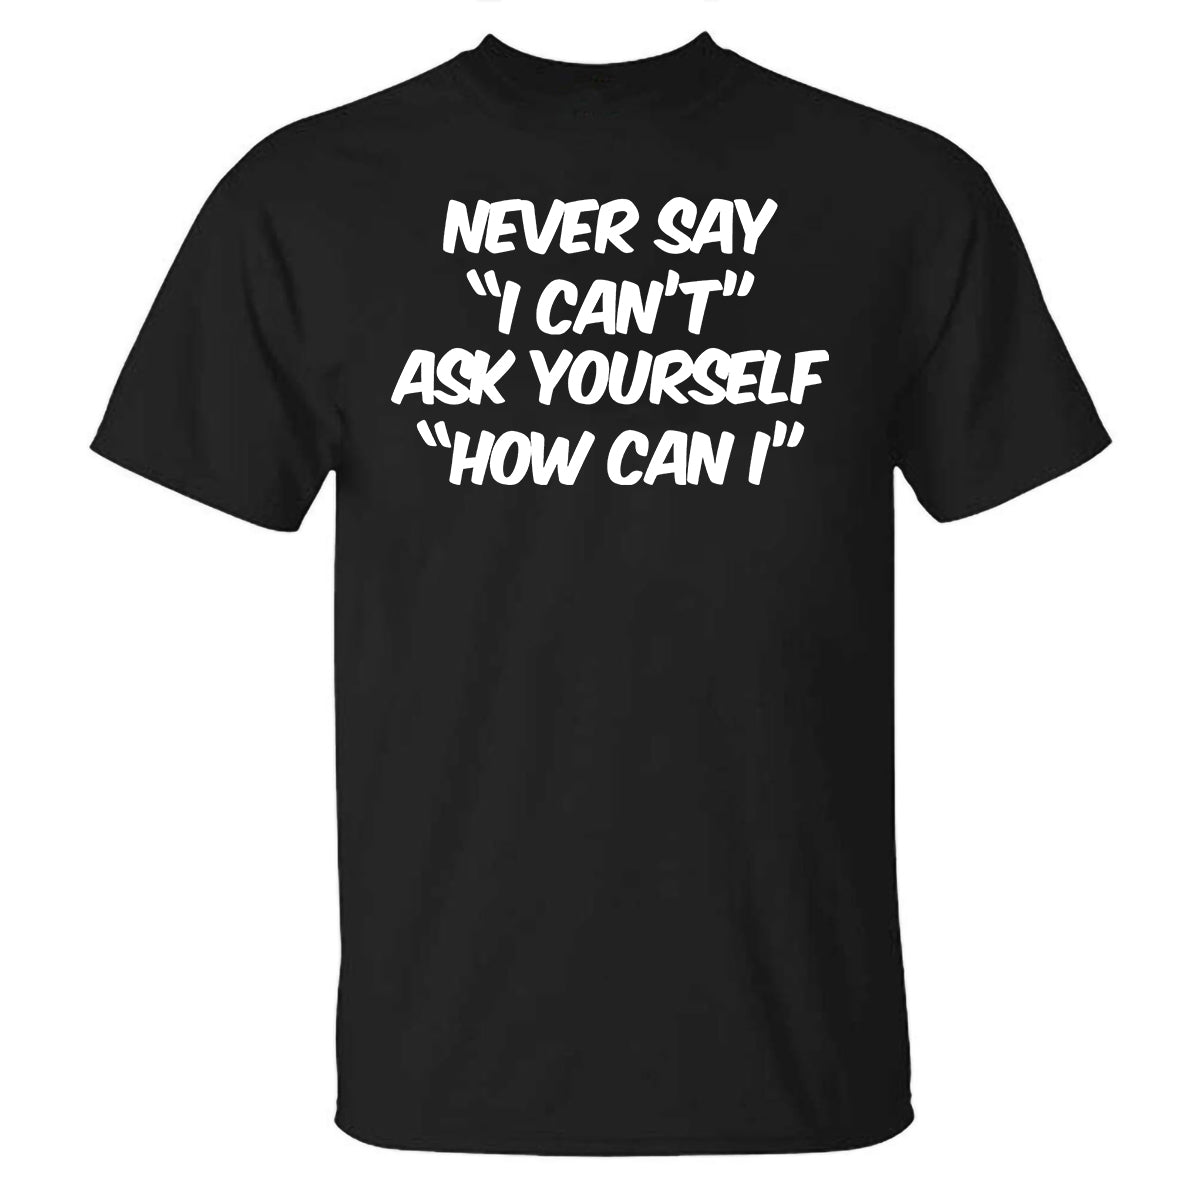 Never Say "I Can't" Ask Yourself "How Can I" Printed T-shirt